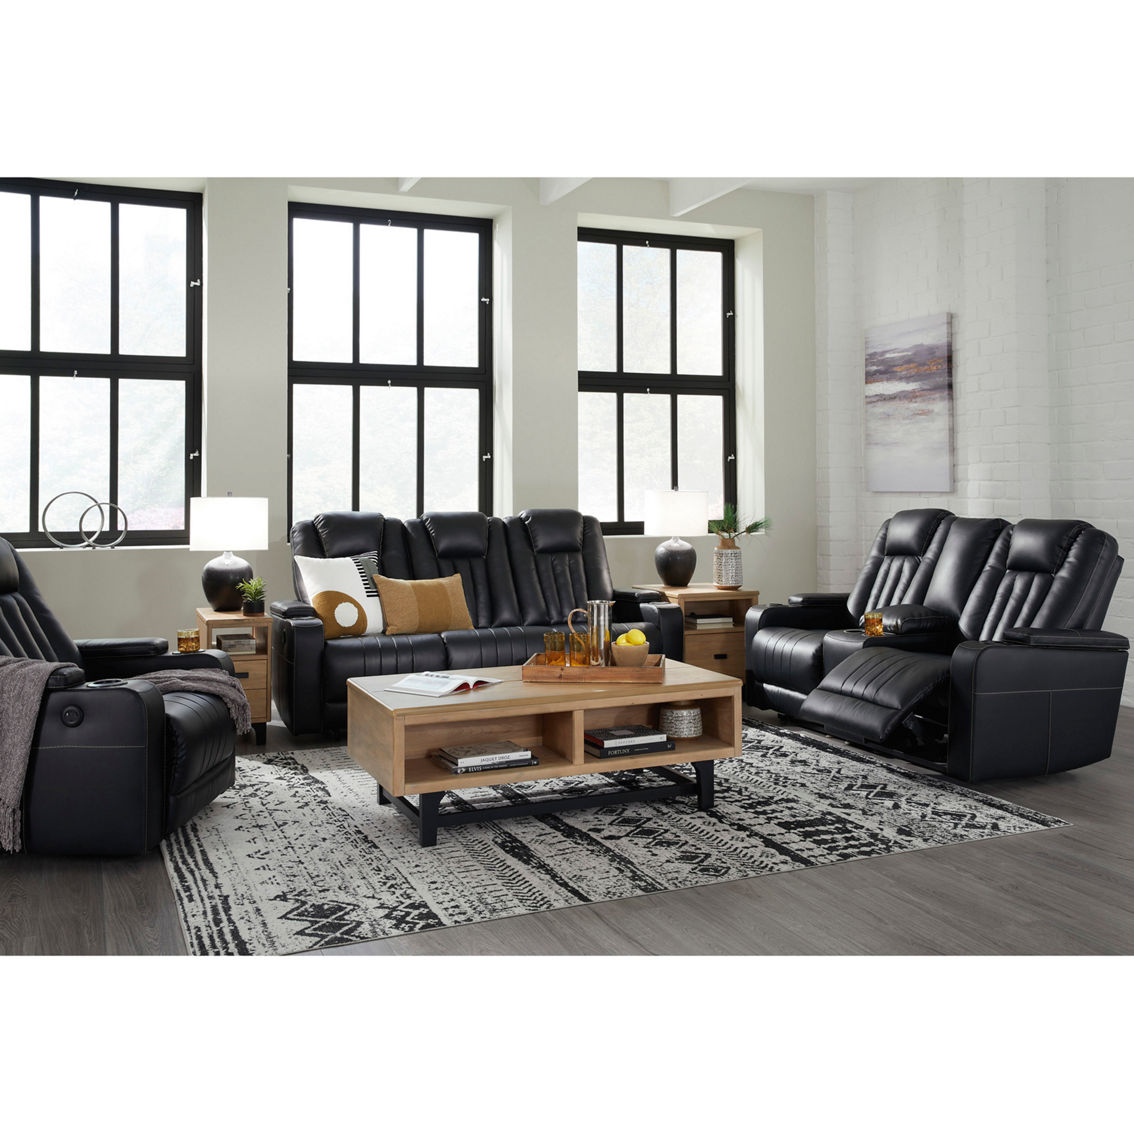 Signature Design by Ashley Center Point Reclining Sofa with Drop Down Table - Image 10 of 10